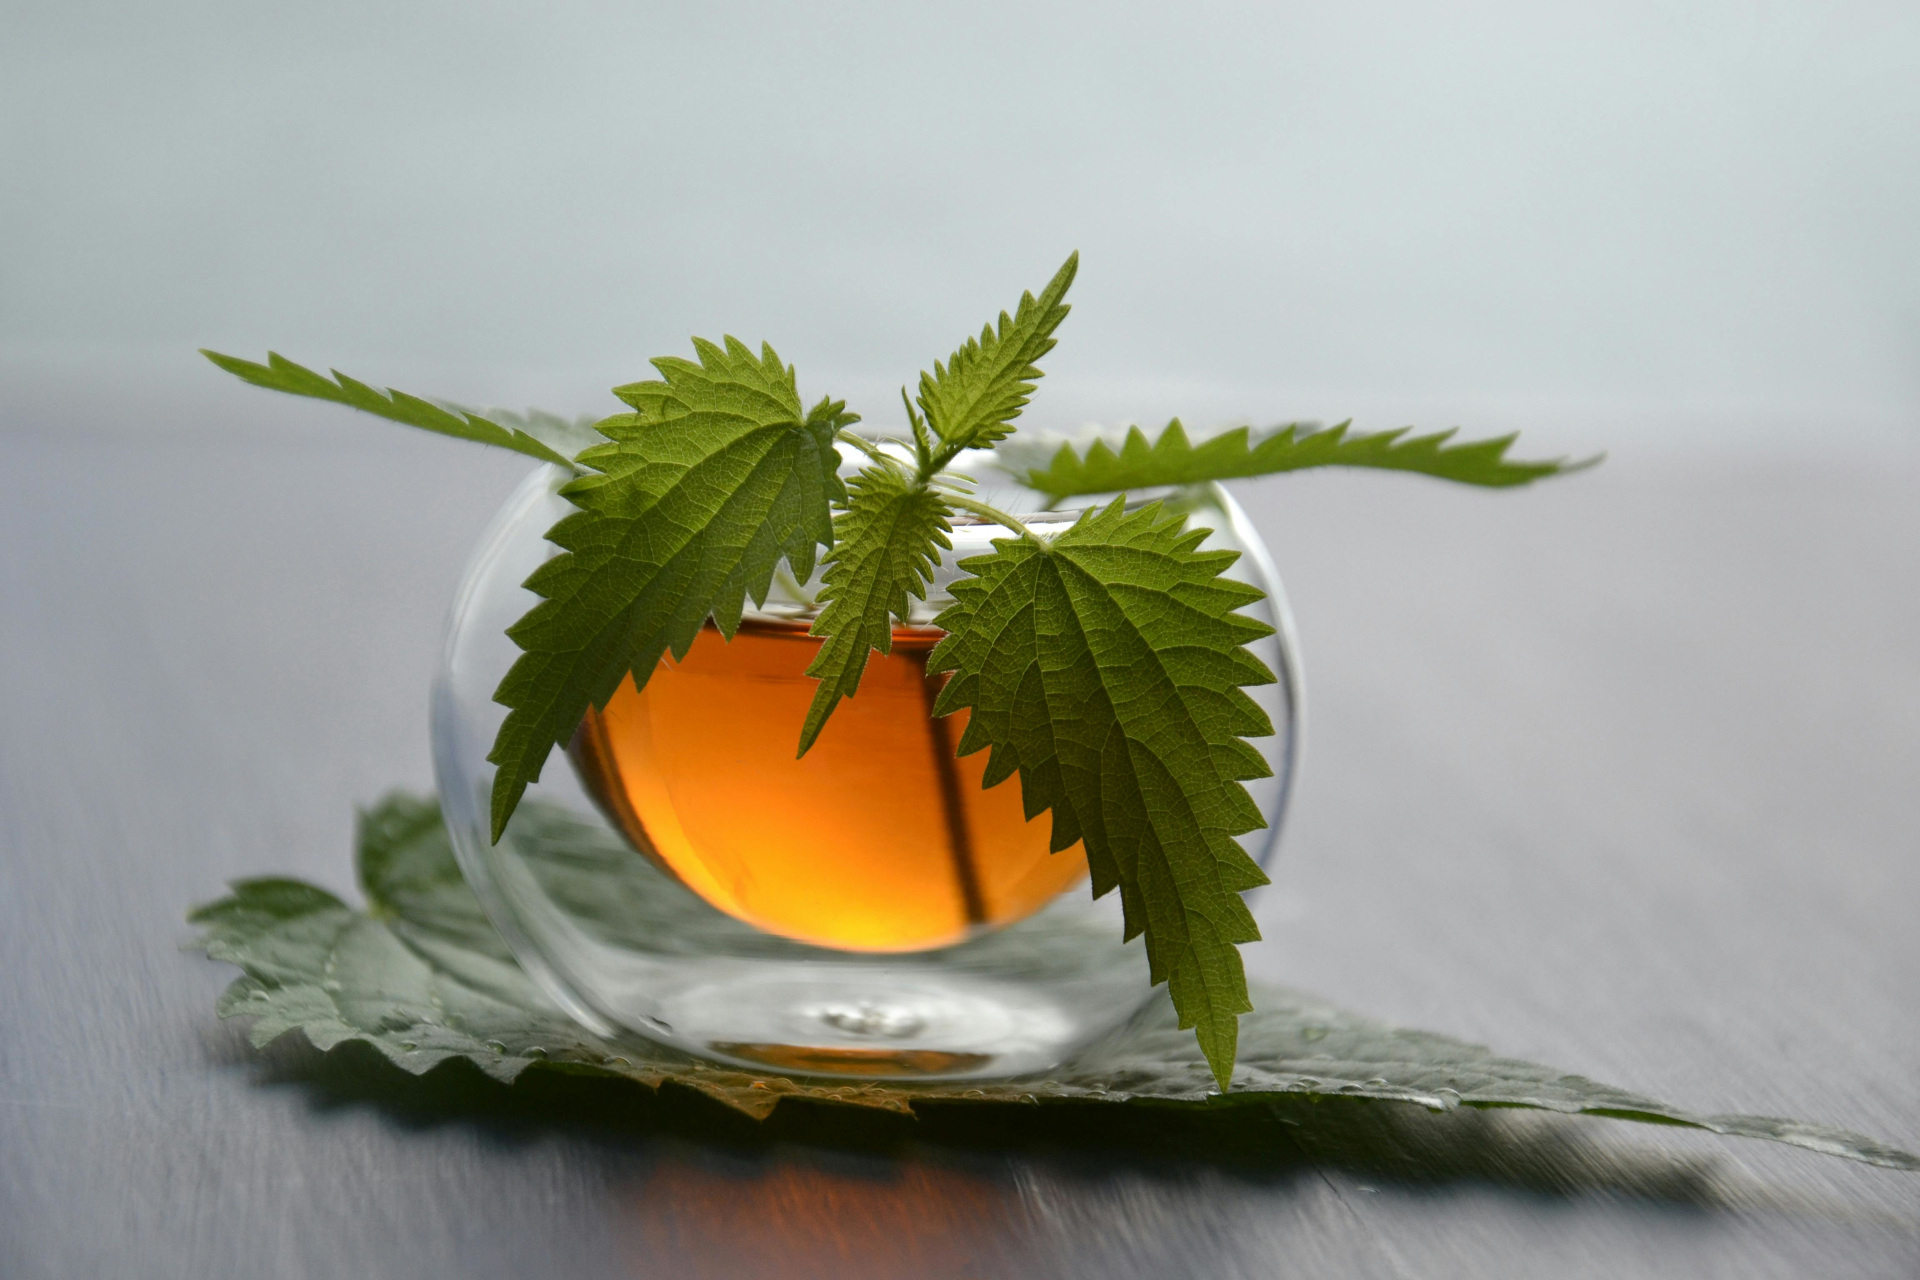 Need To Improve Your Blood Sugar? Nettle Tea Could Help